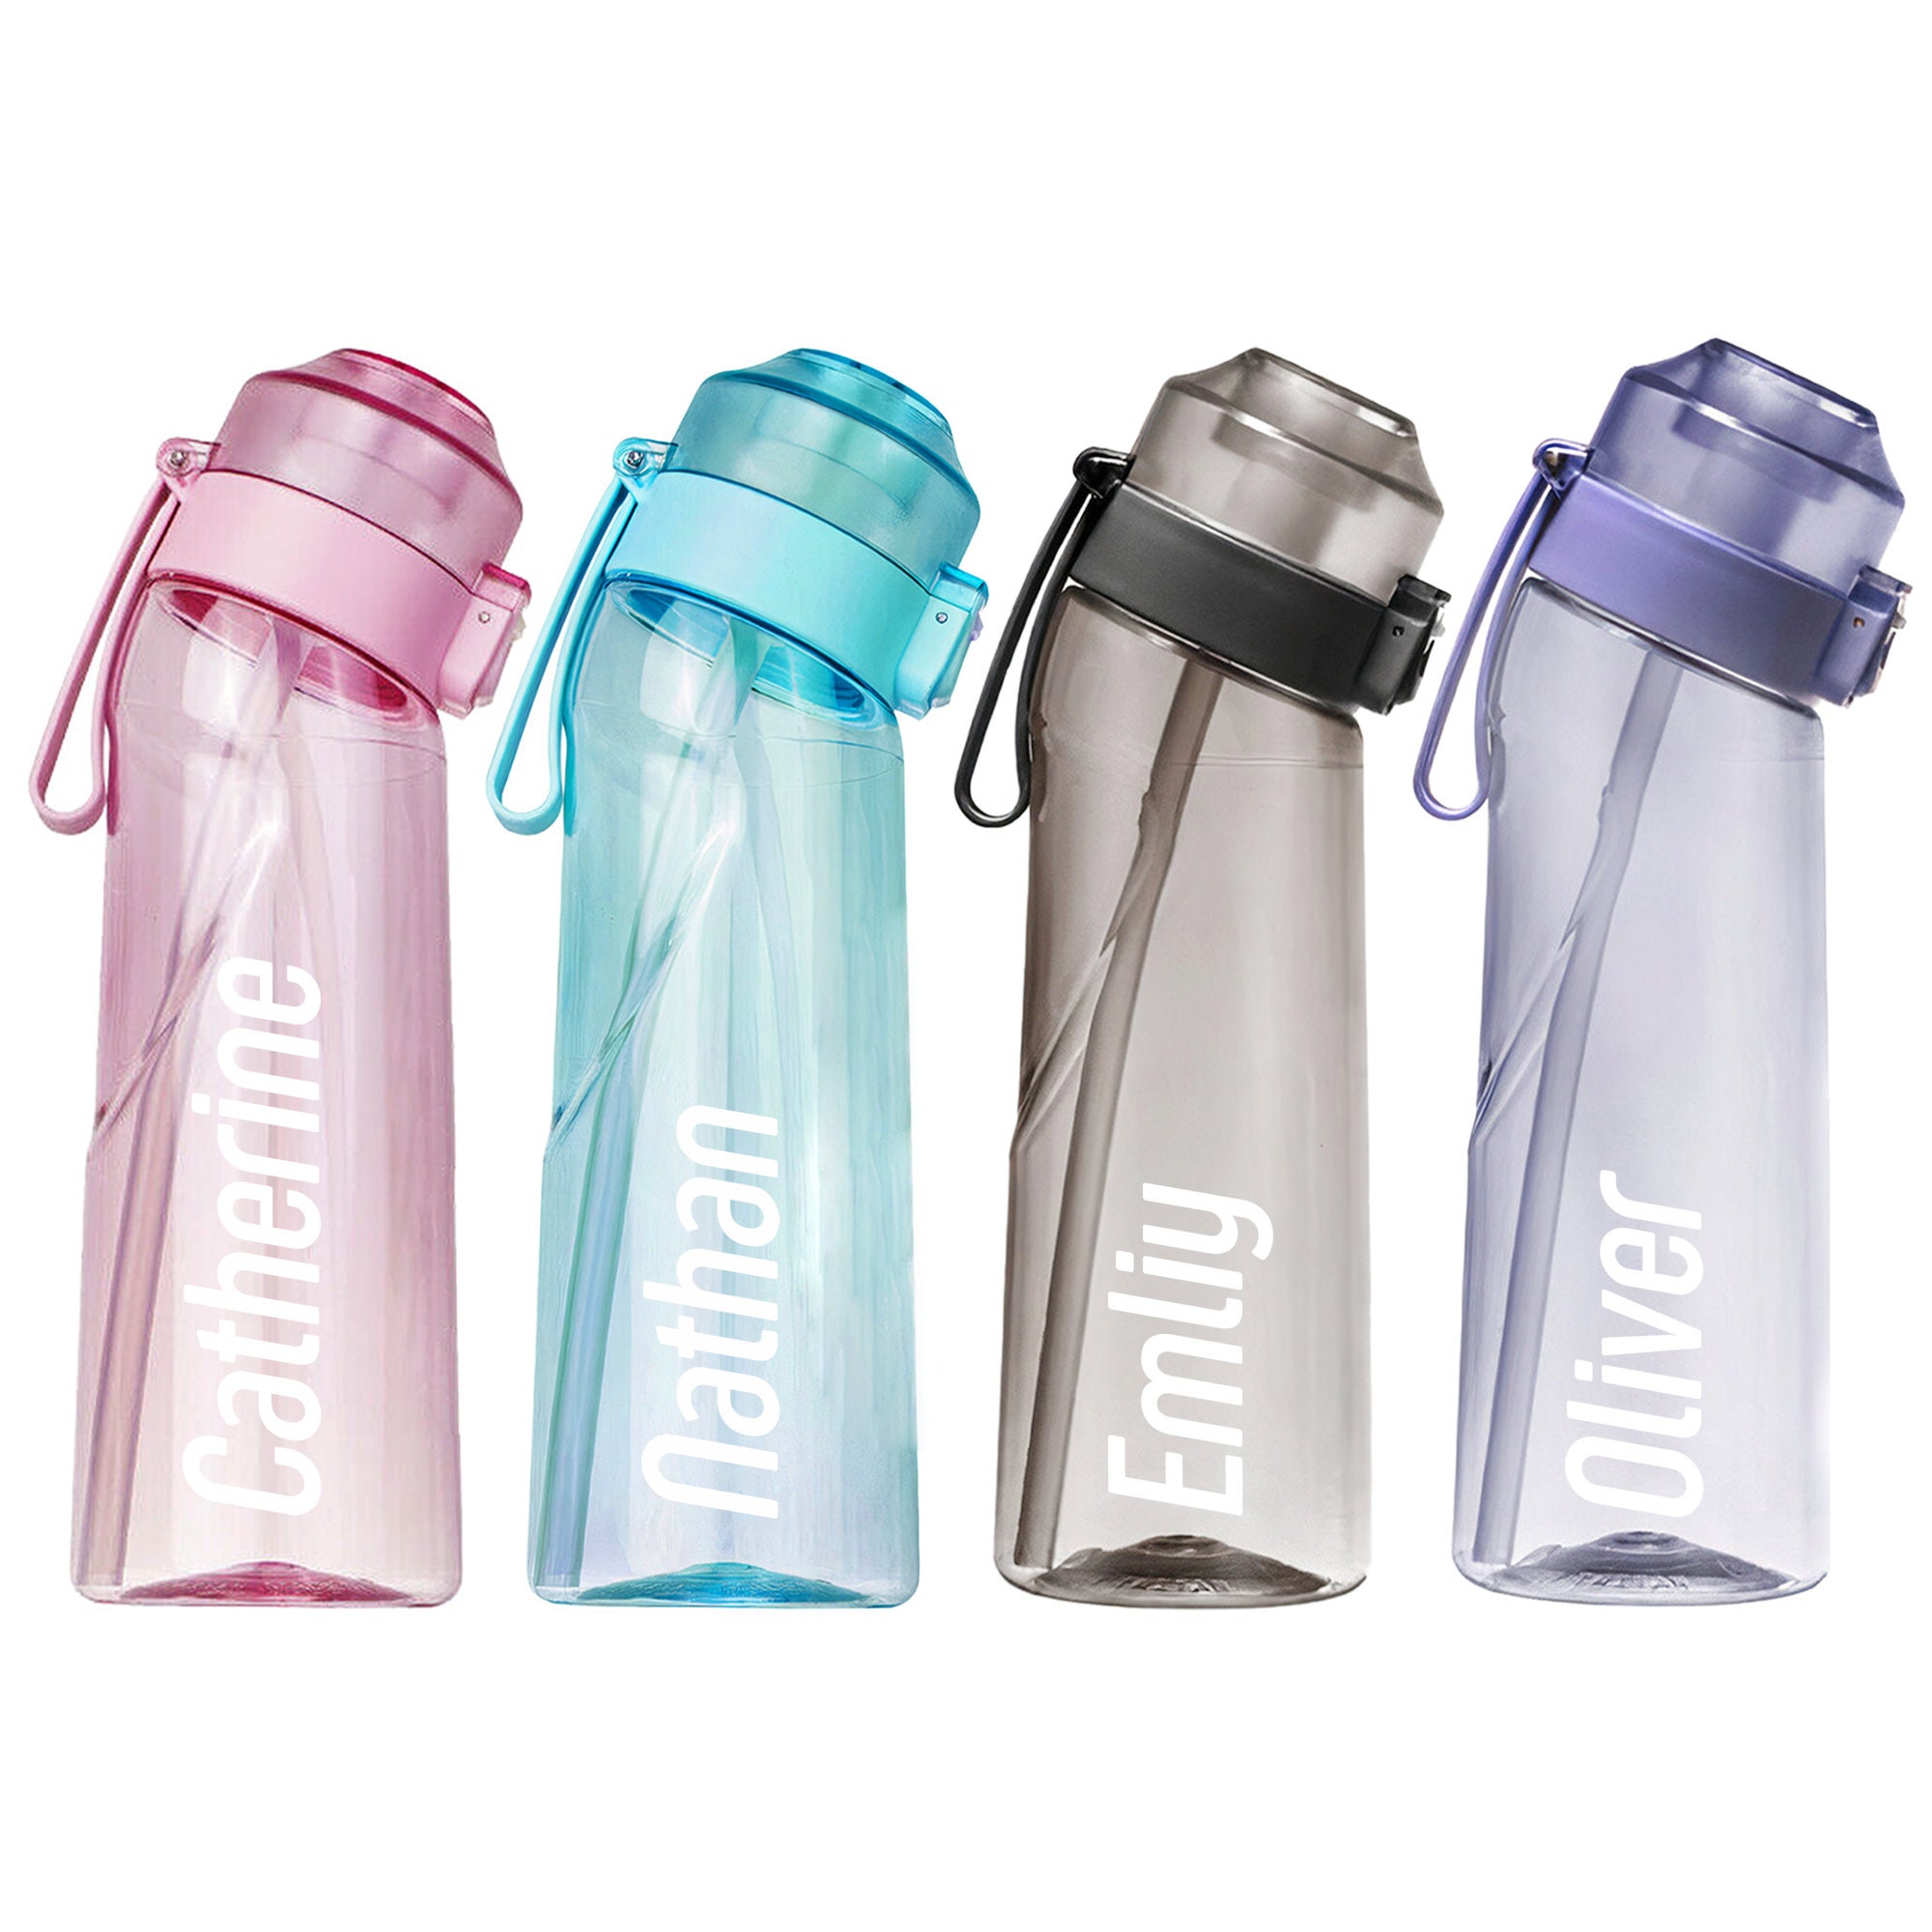 water bottle with flavors pods # airup # flavoredwaterbottle #waterbot